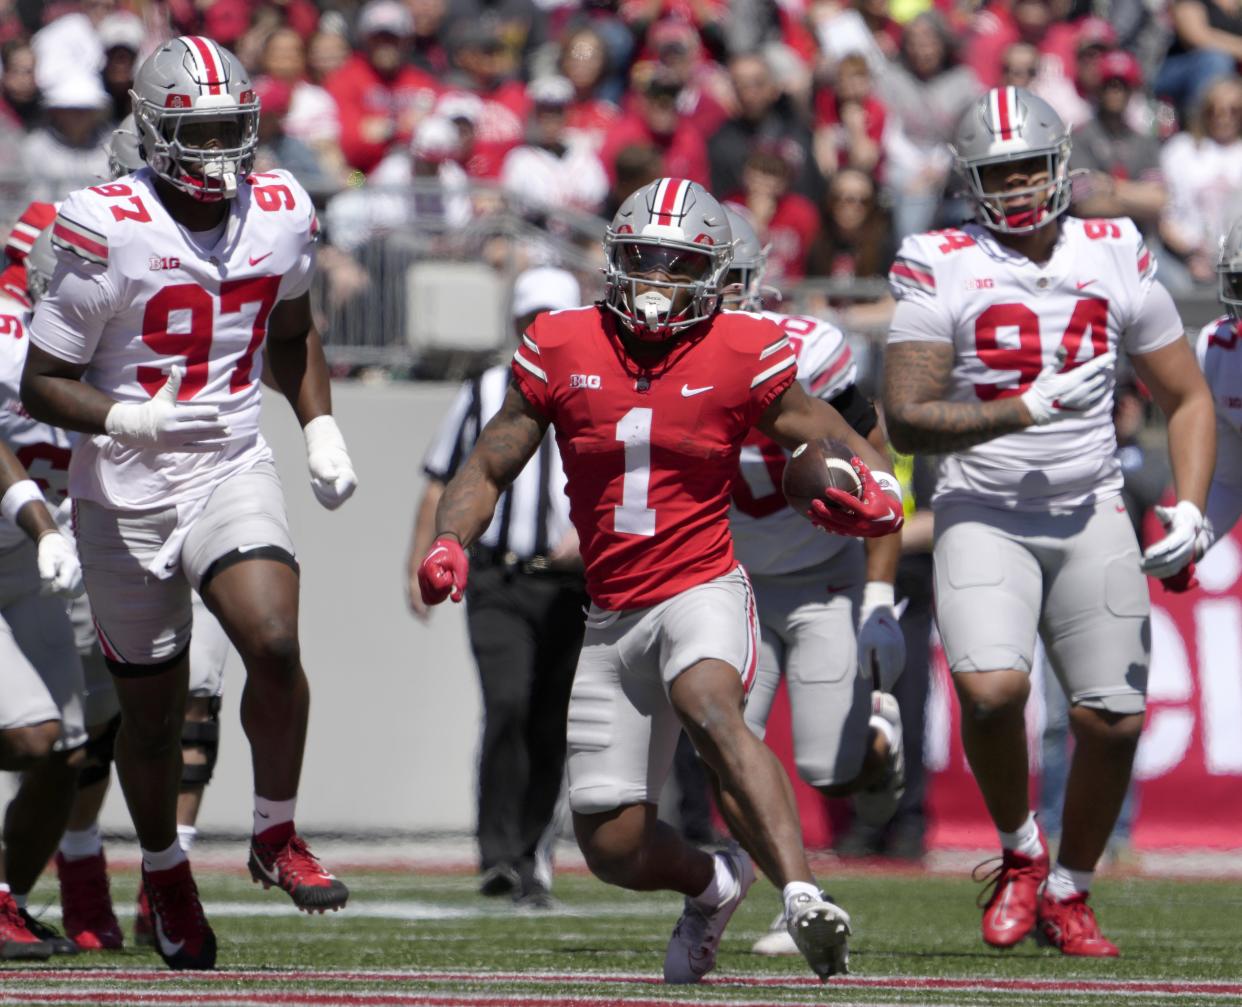 Running back Quinshon Judkins transferred to Ohio State from Mississippi.